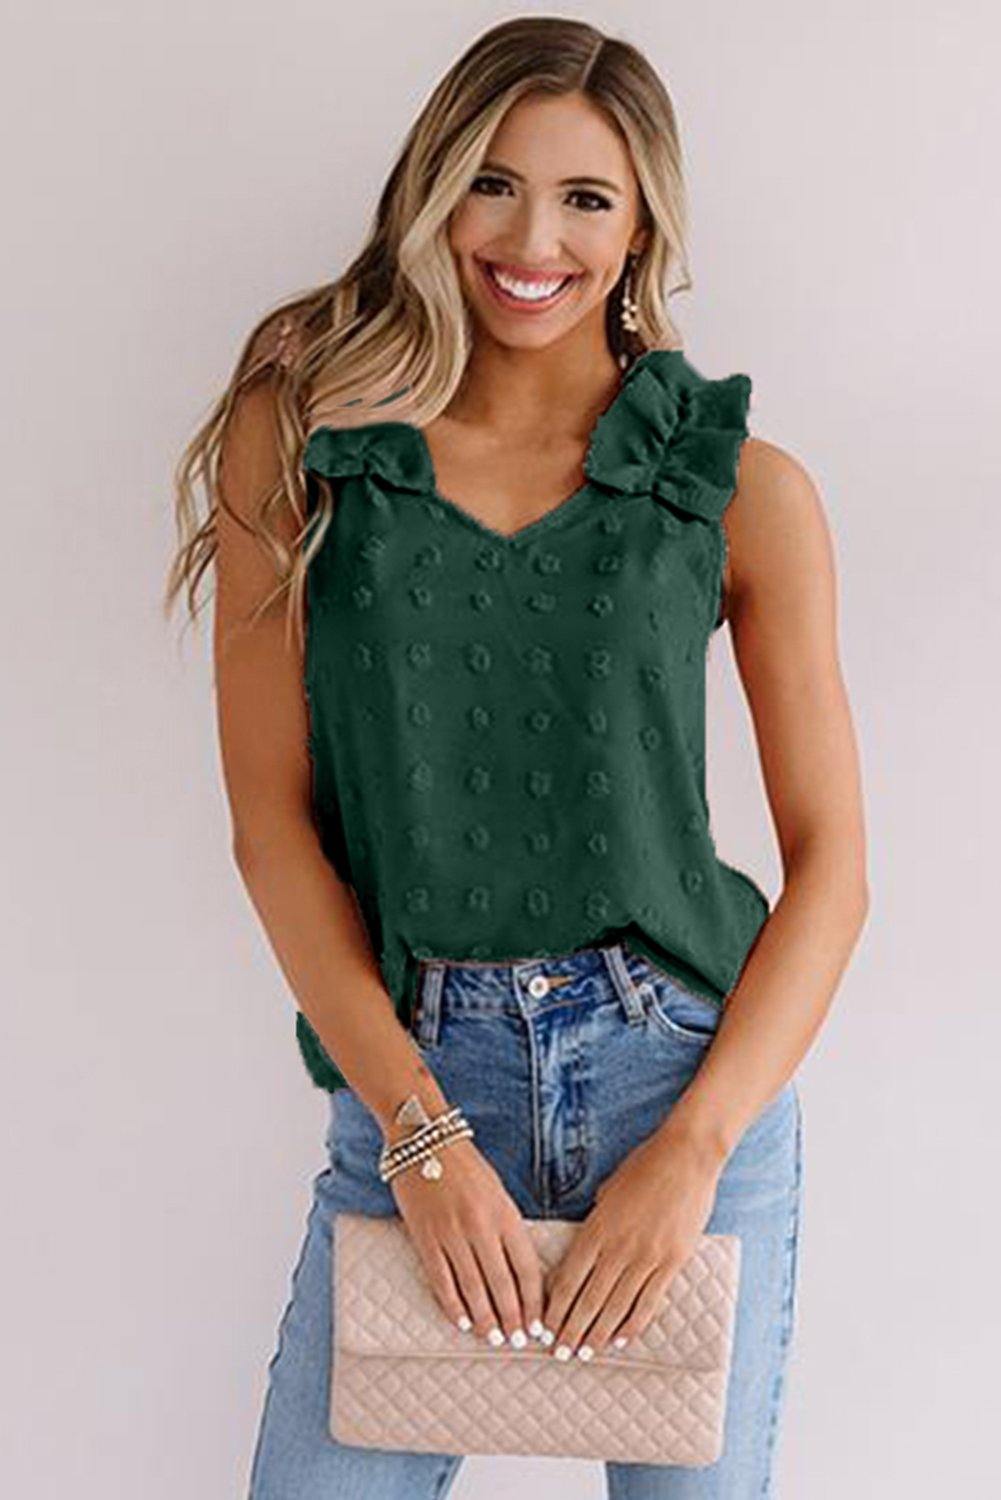 Swiss Dot Woven Sleeveless Top With Ruffled Straps - L & M Kee, LLC